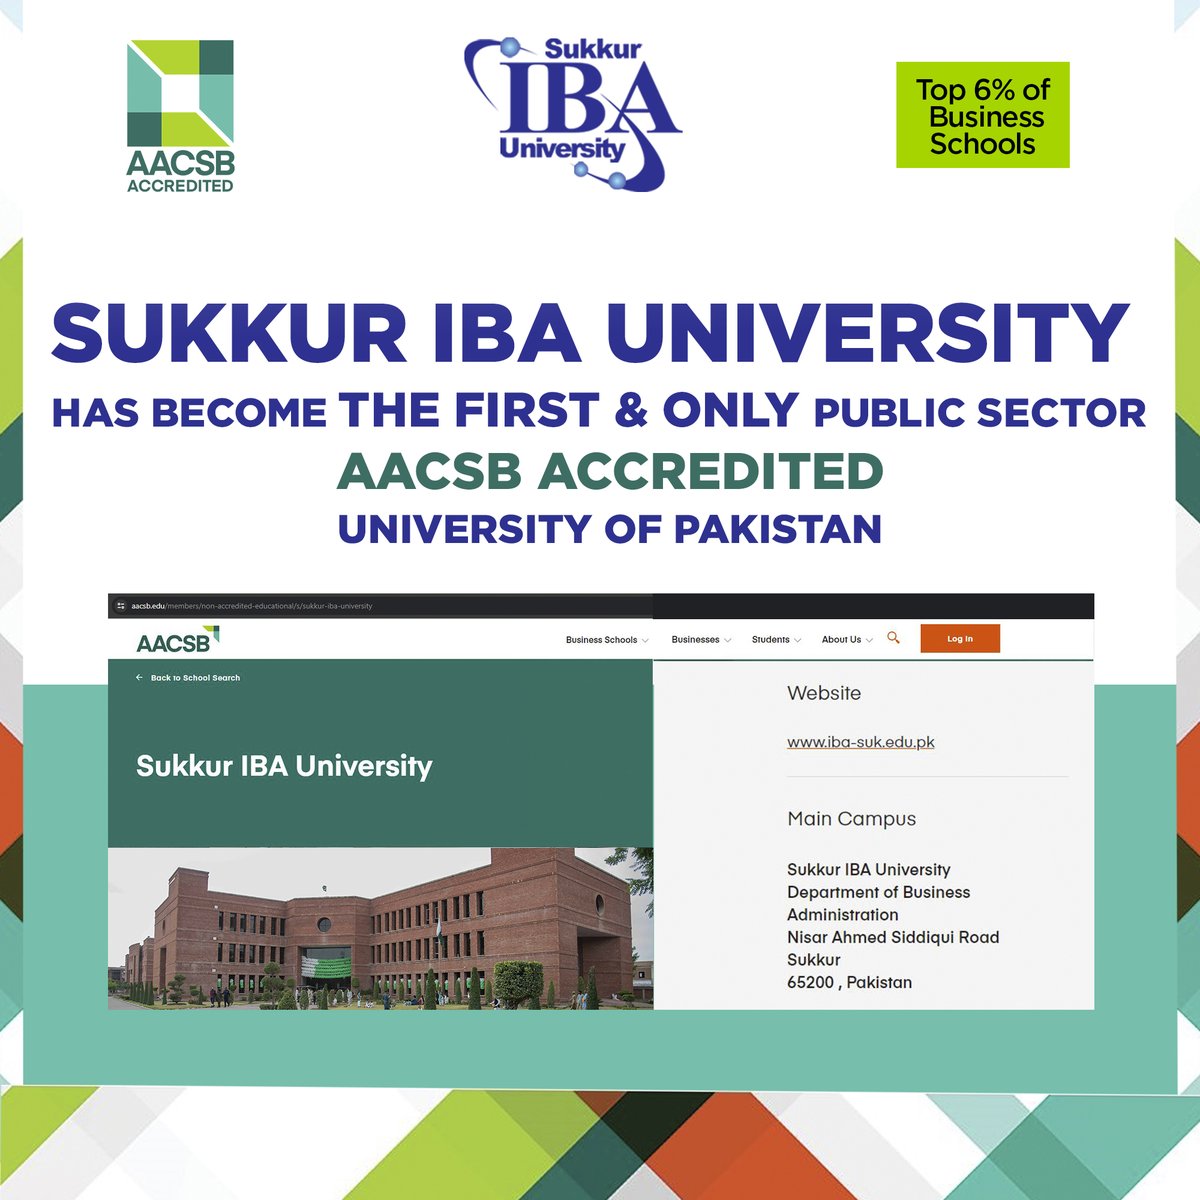 Exciting News! Sukkur IBA University has achieved the prestigious International AACSB Accreditation – a feat accomplished by only 6% of schools worldwide. #aacsbaccreditation #SukkurIBAExcellence #GlobalRecognition